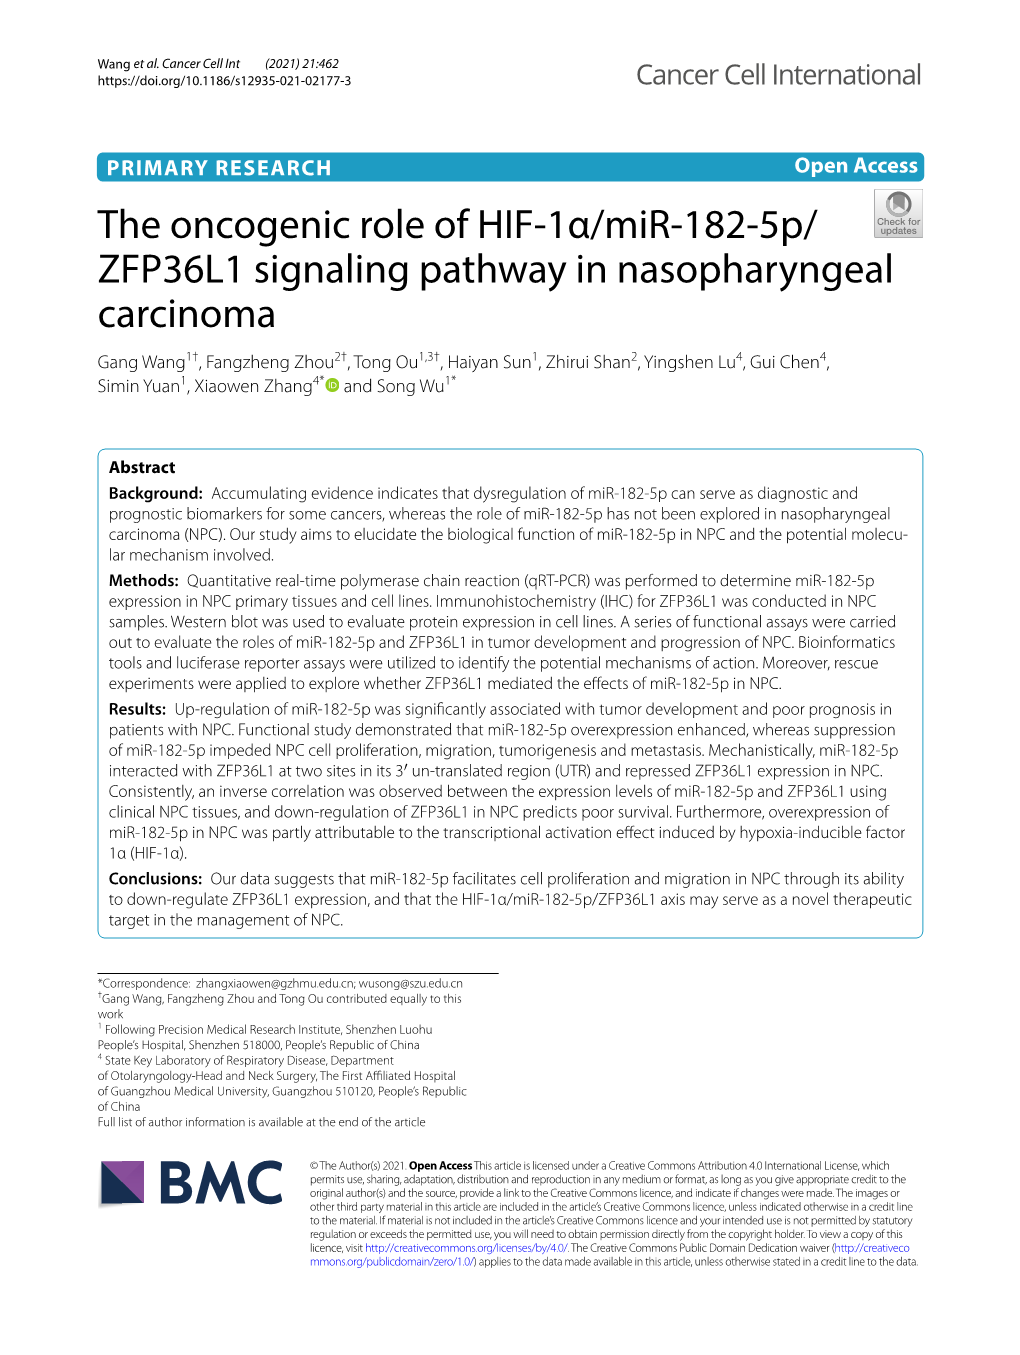 The Oncogenic Role of HIF-1Α/Mir-182-5P/ZFP36L1